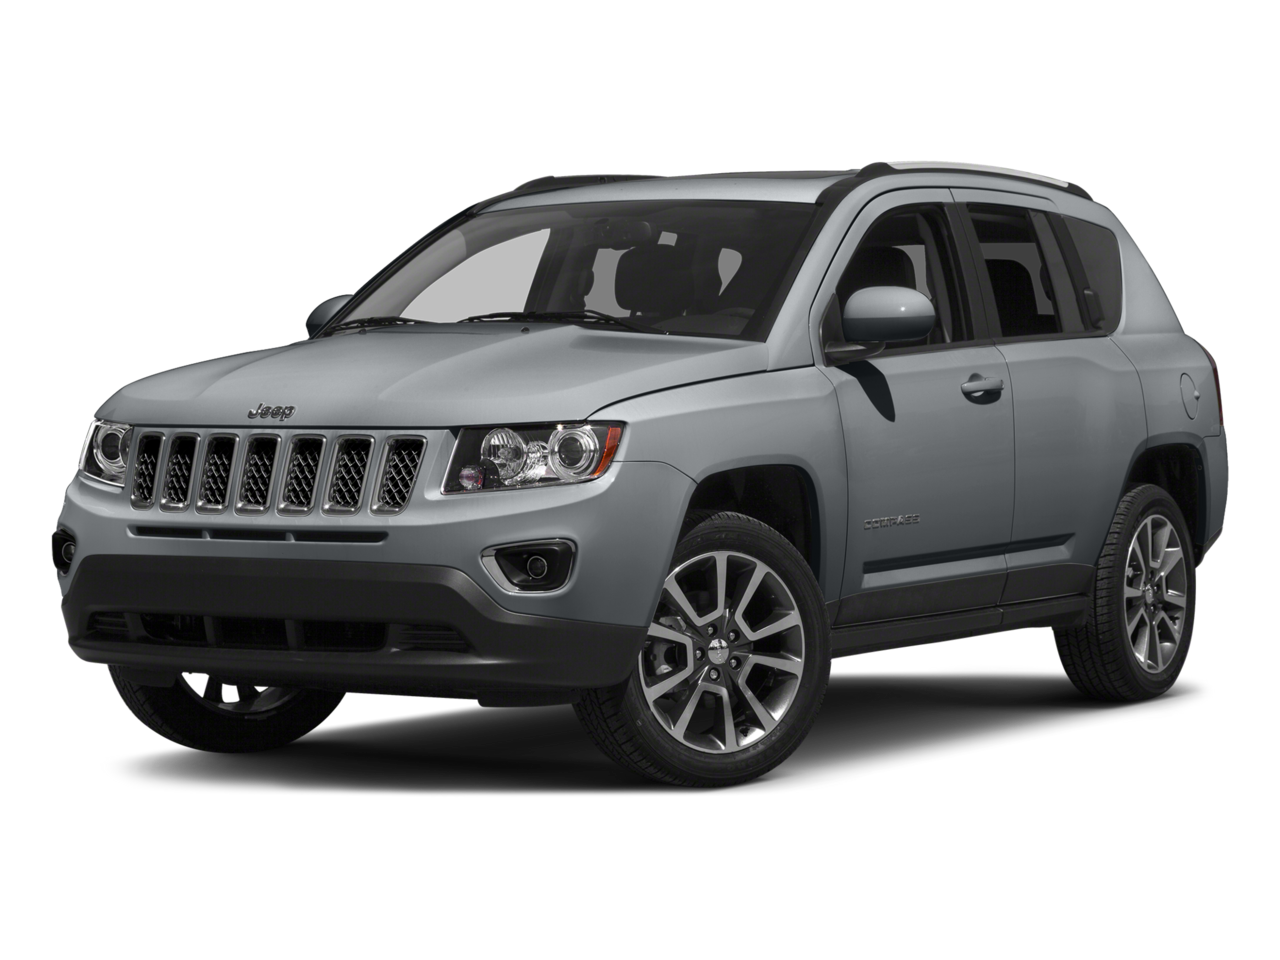 2015 Jeep Compass oem parts and accessories on sale